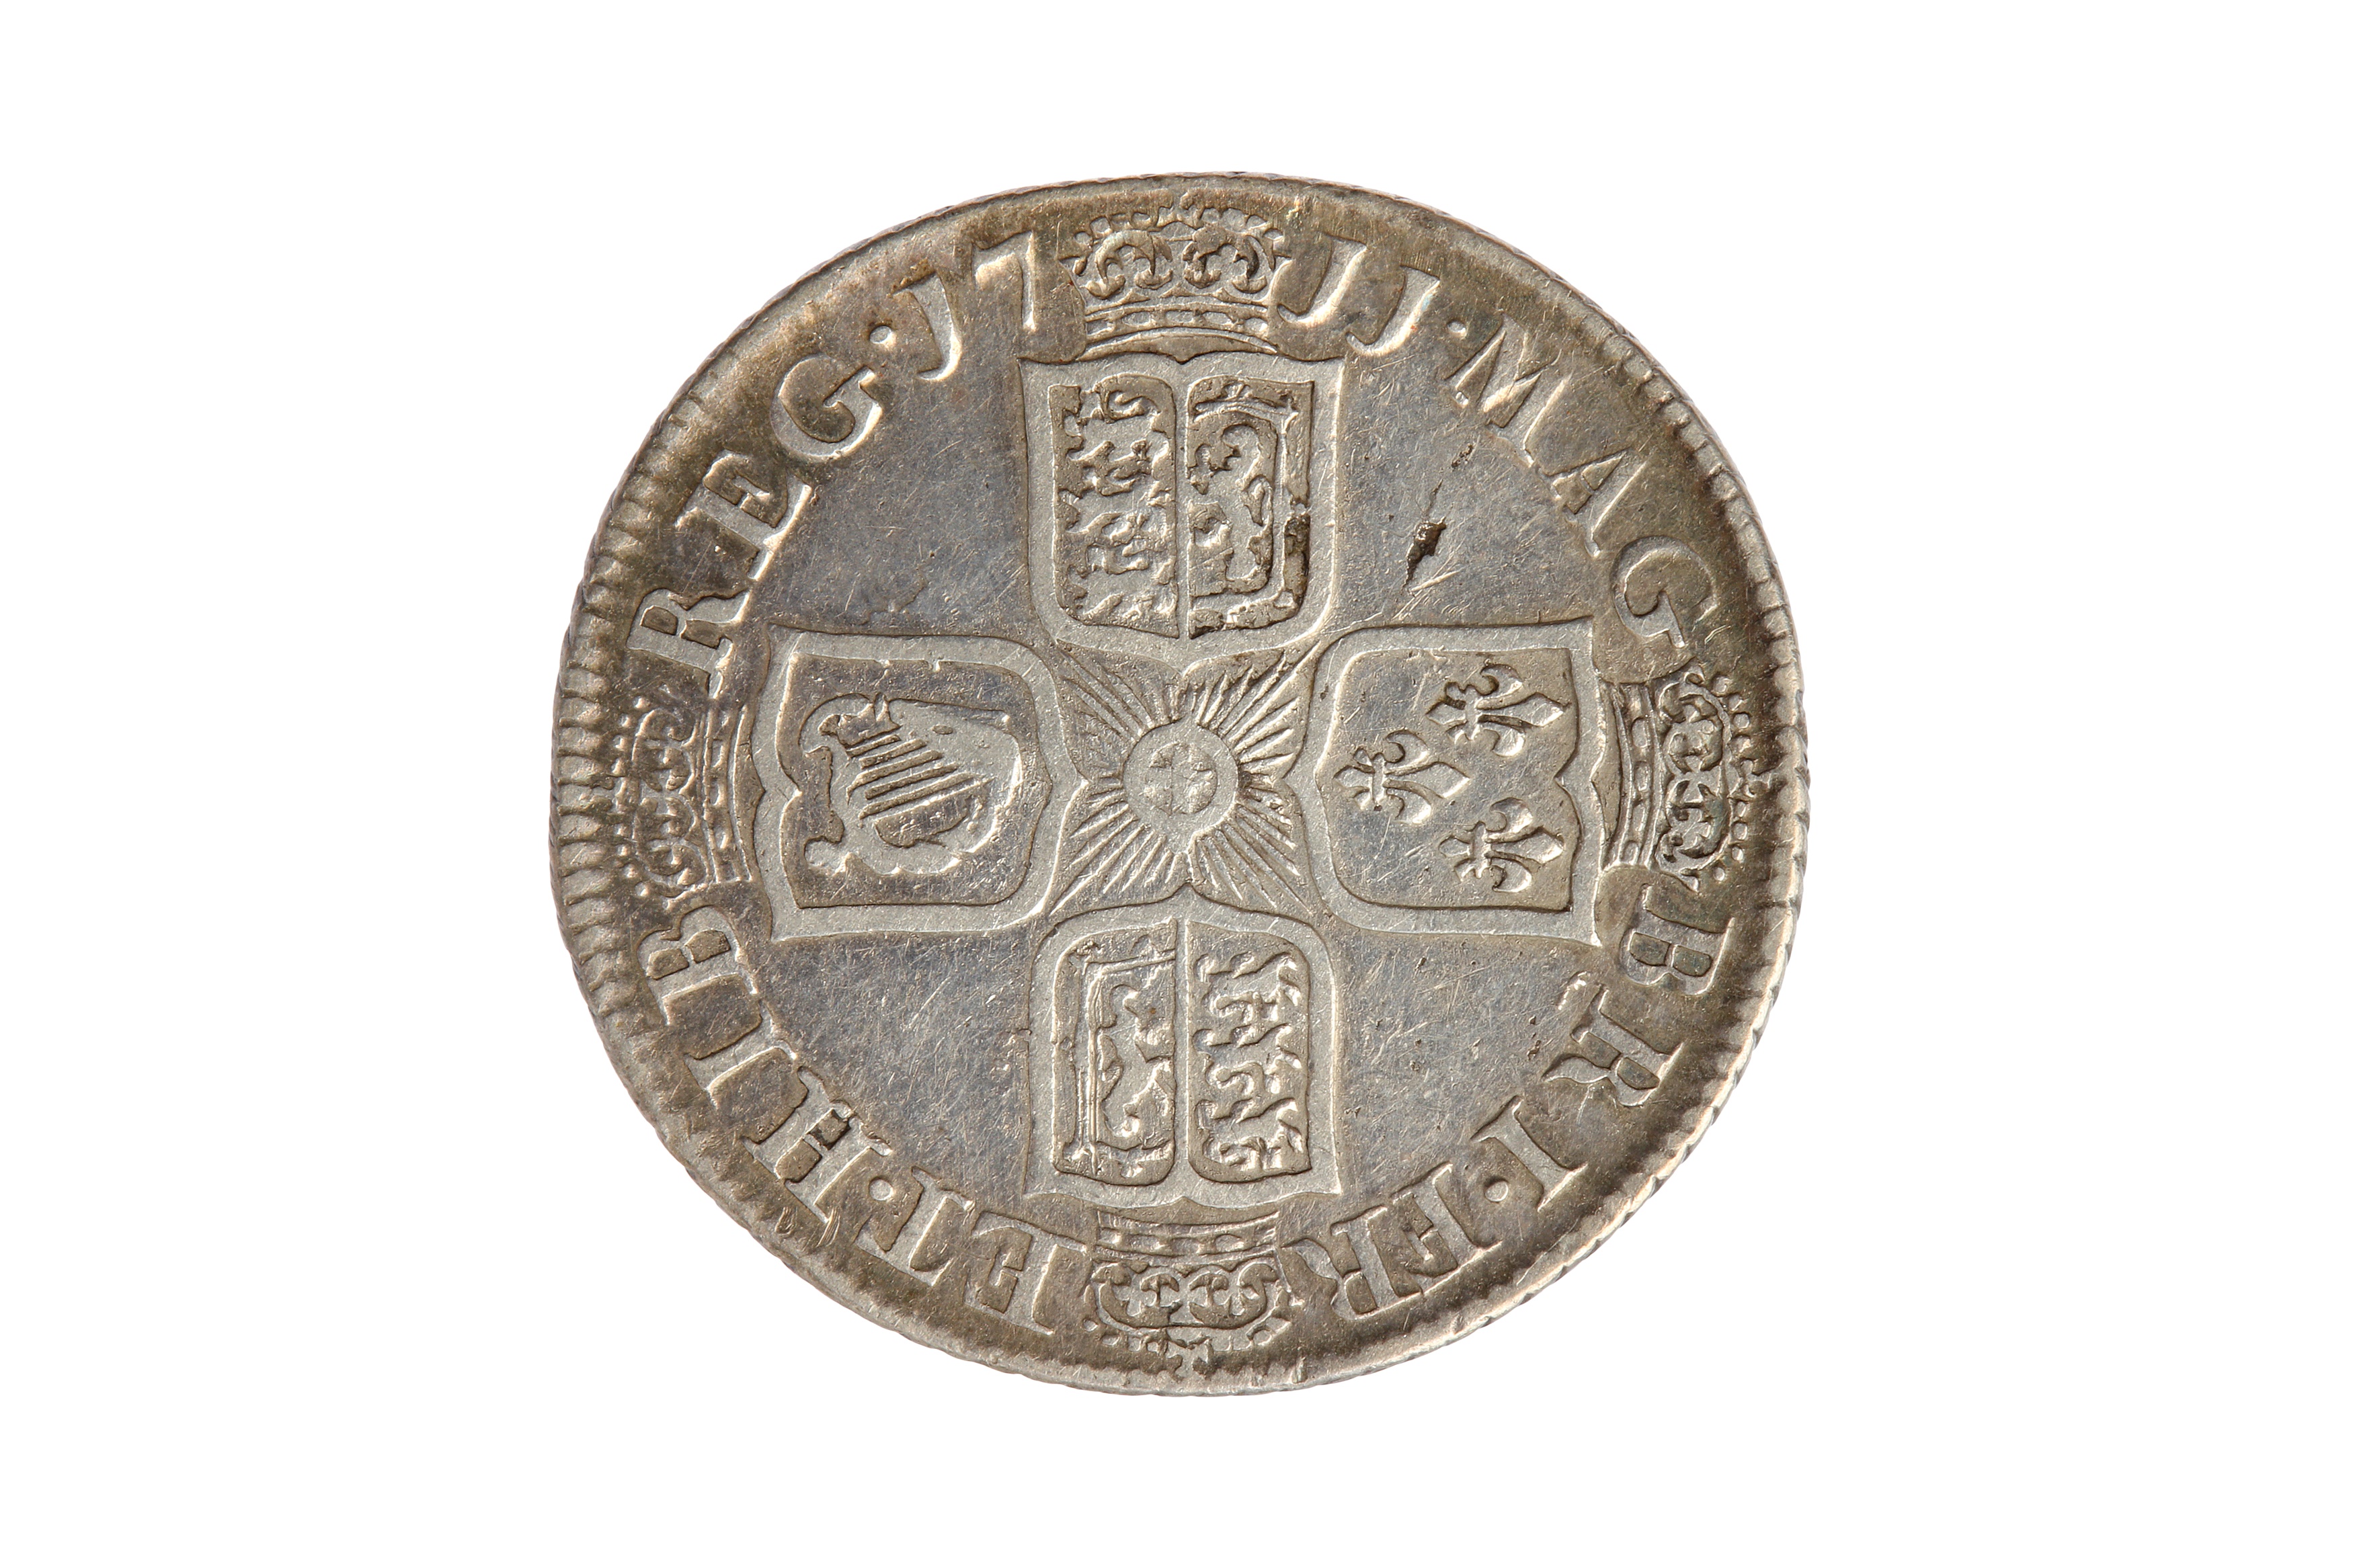 ANNE (1702 - 1714), 1711 SHILLING. - Image 2 of 2